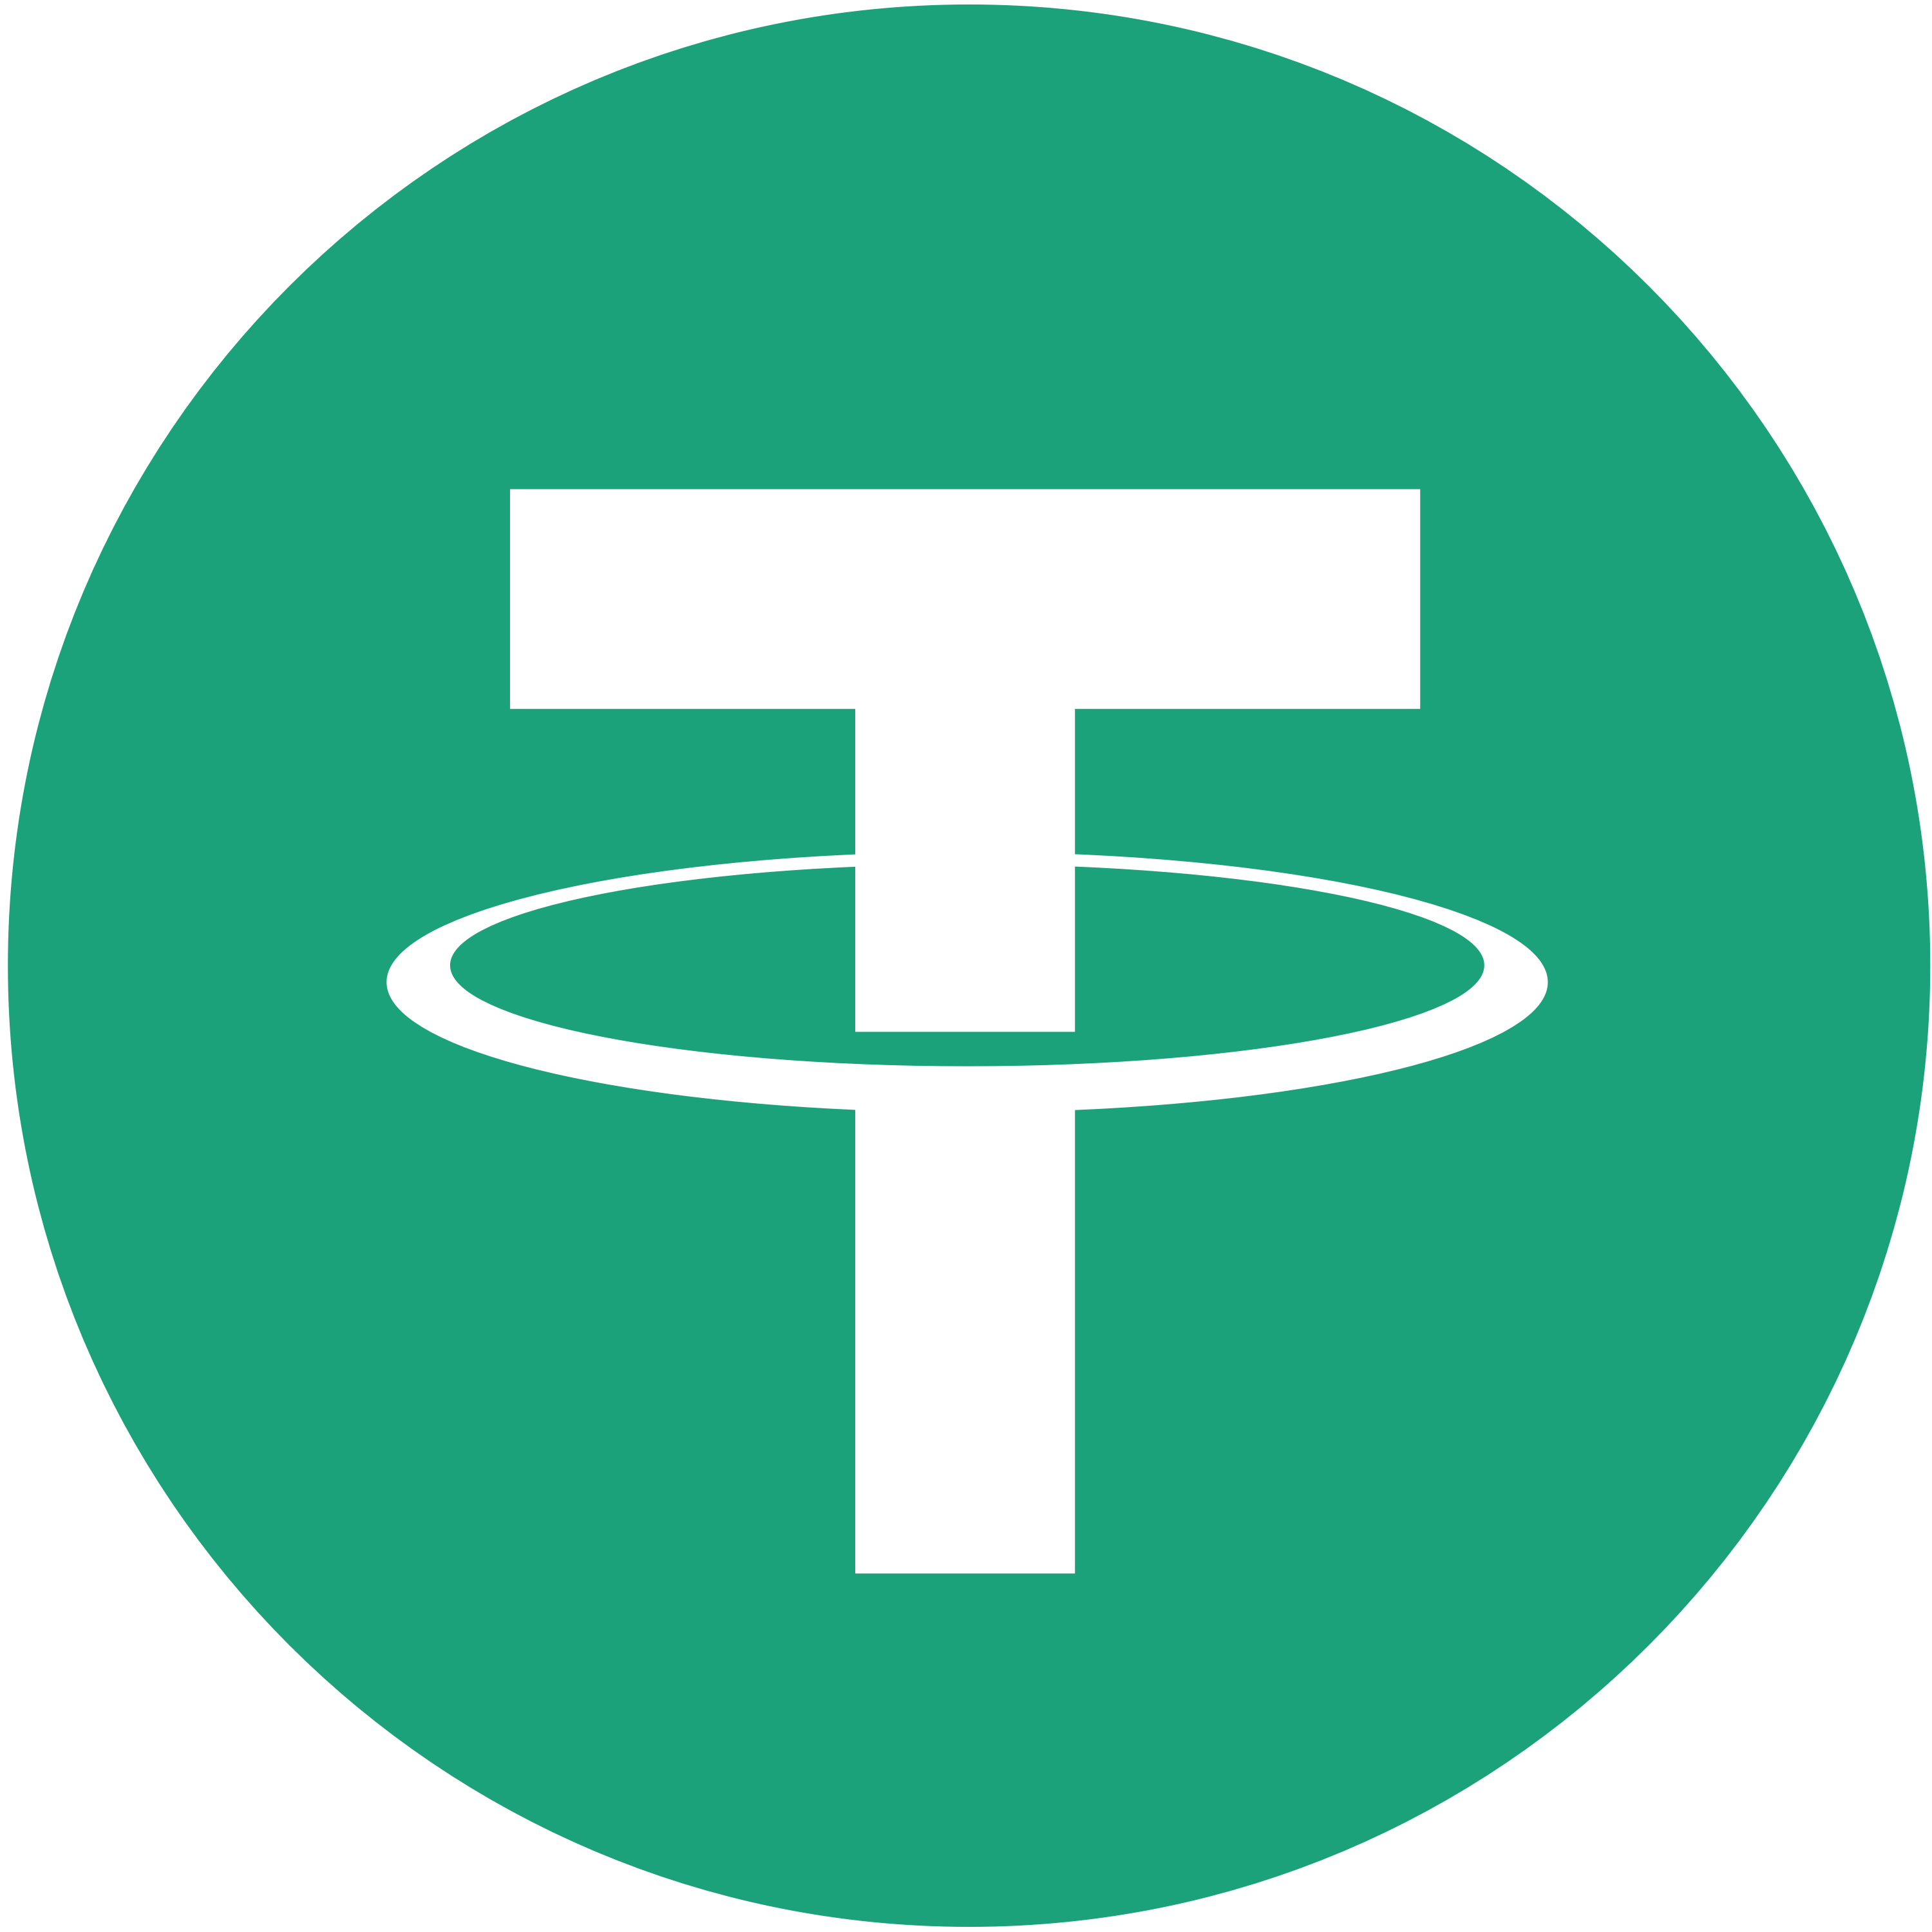 We accept Tether USD (USDT) and other altcoins